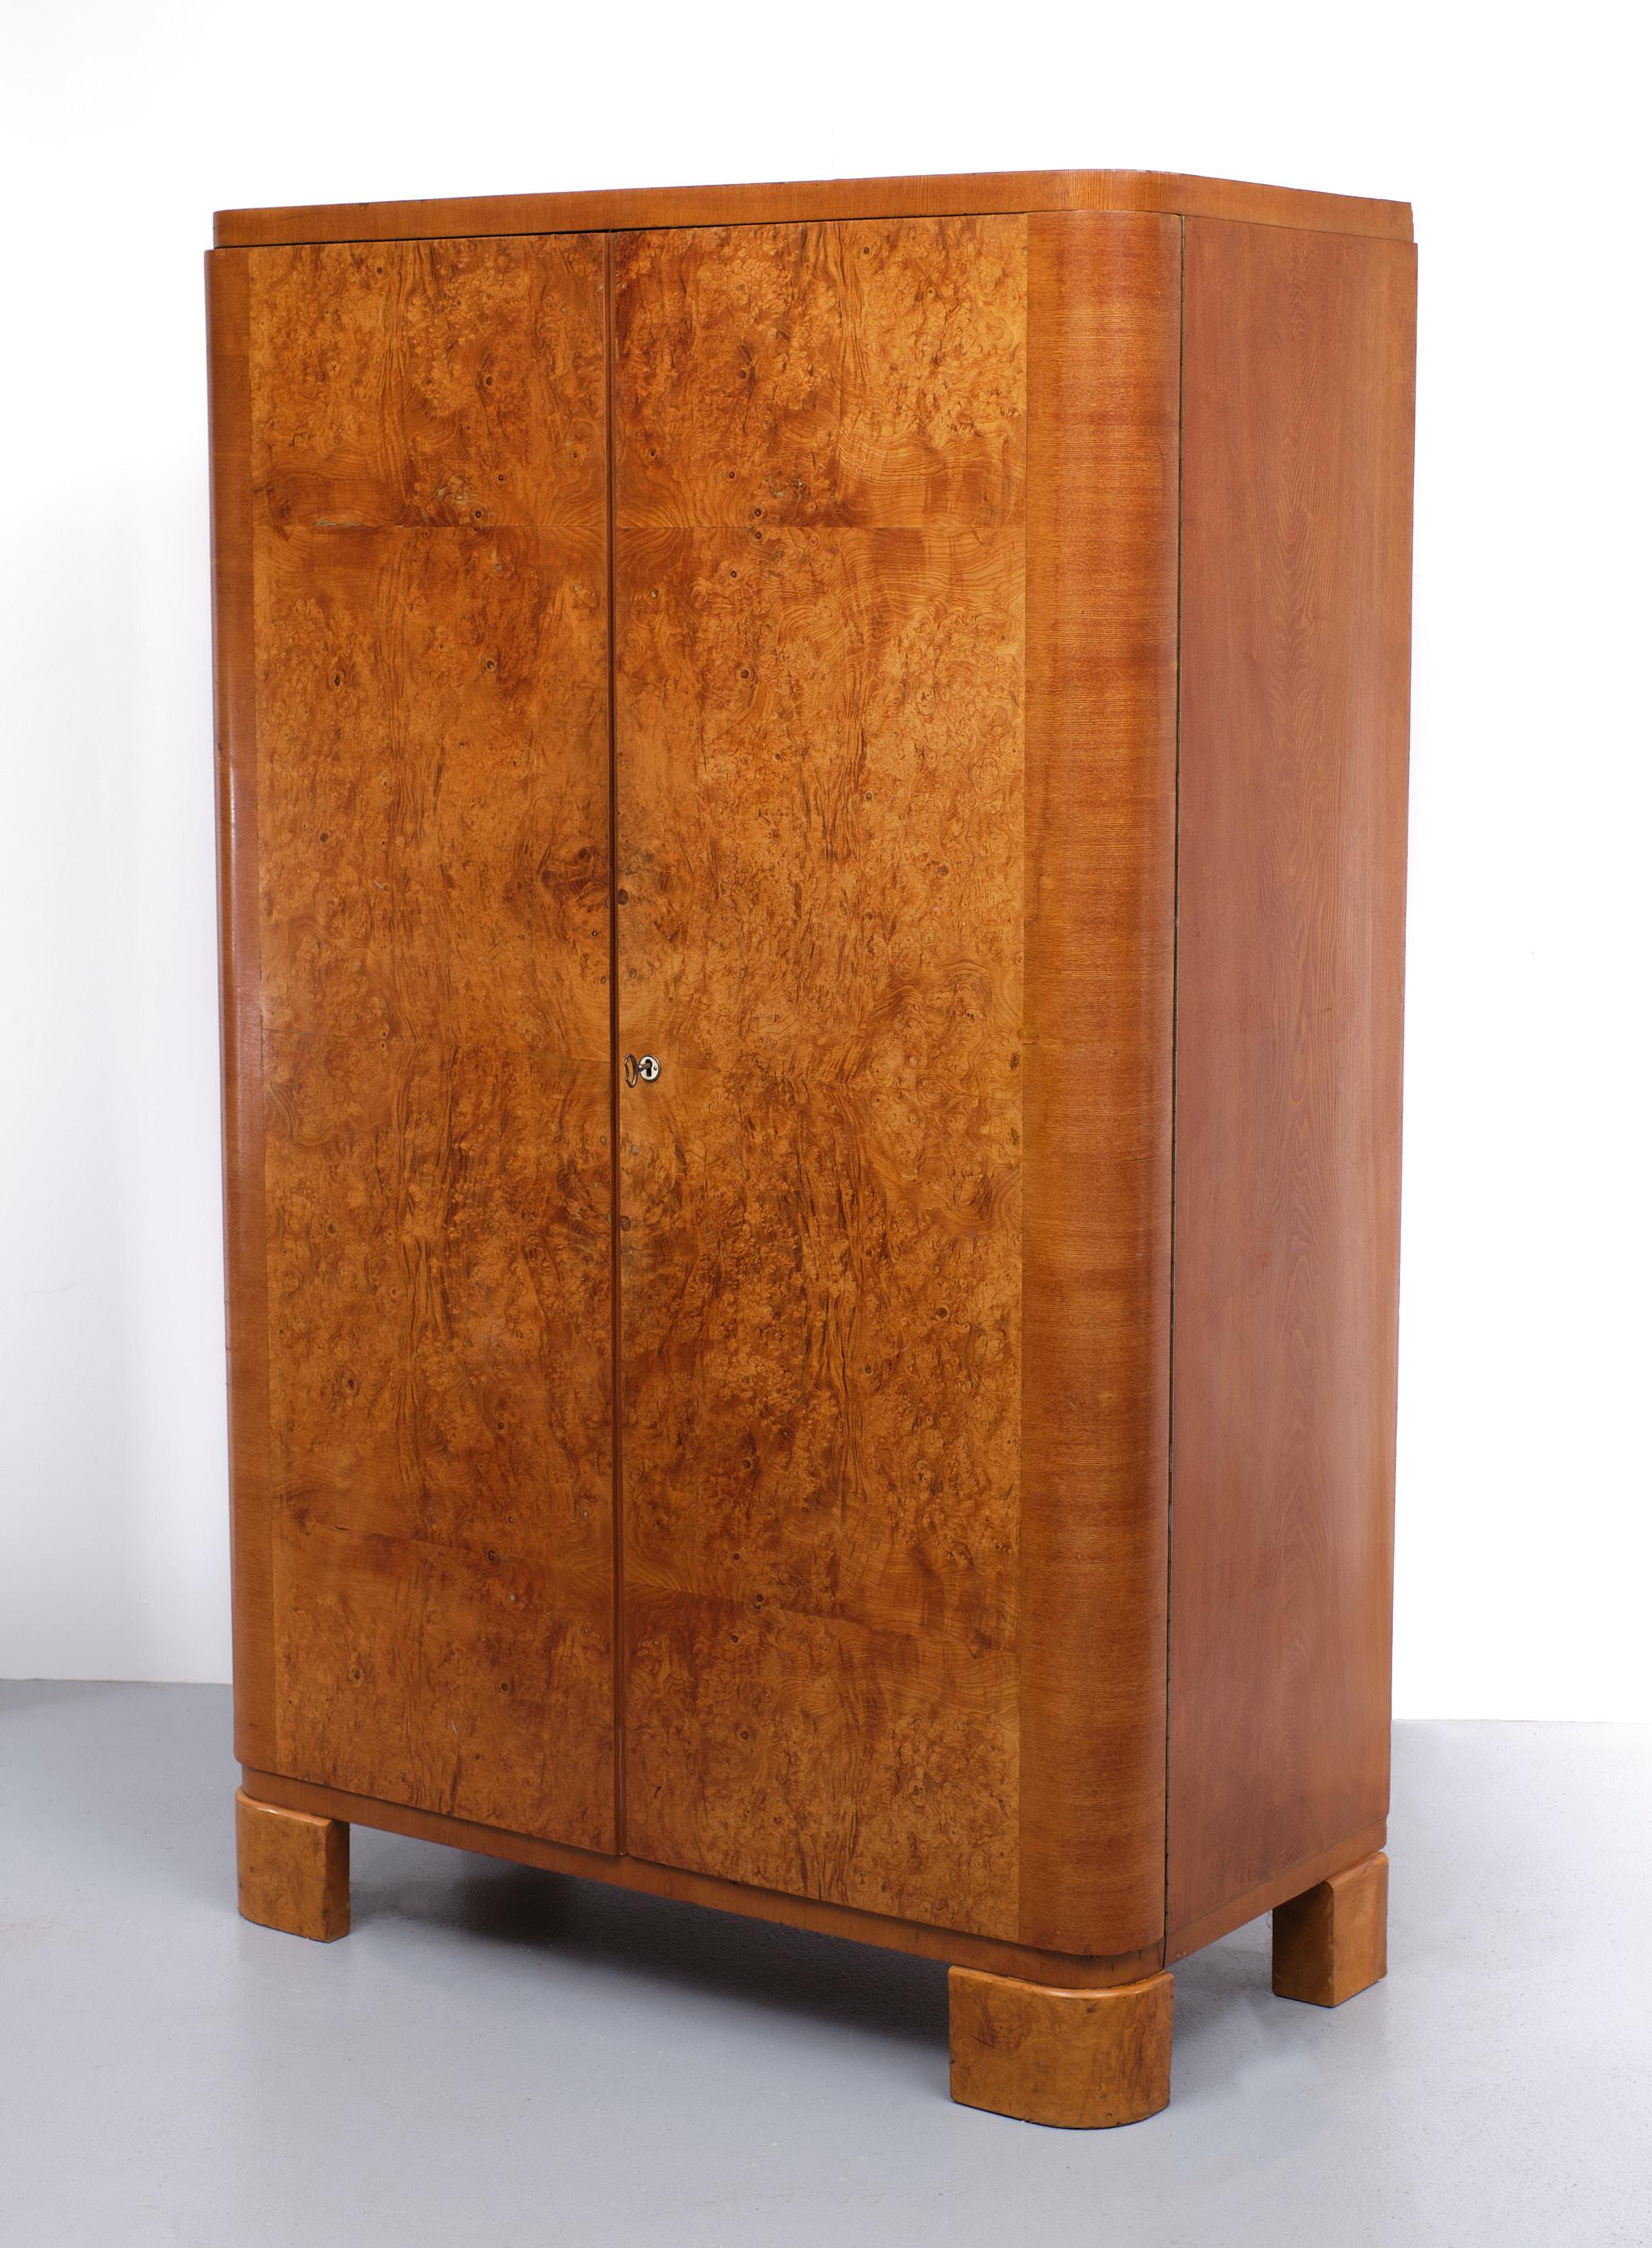 Beautiful impressive Art Deco burl wood wardrobe. Two doors Very nice color. Comes with its original interior 4 solid mahogany shelves and a Bottom drawer with chrome handles.
This is a real period piece. With normal wear and tear. Working lock